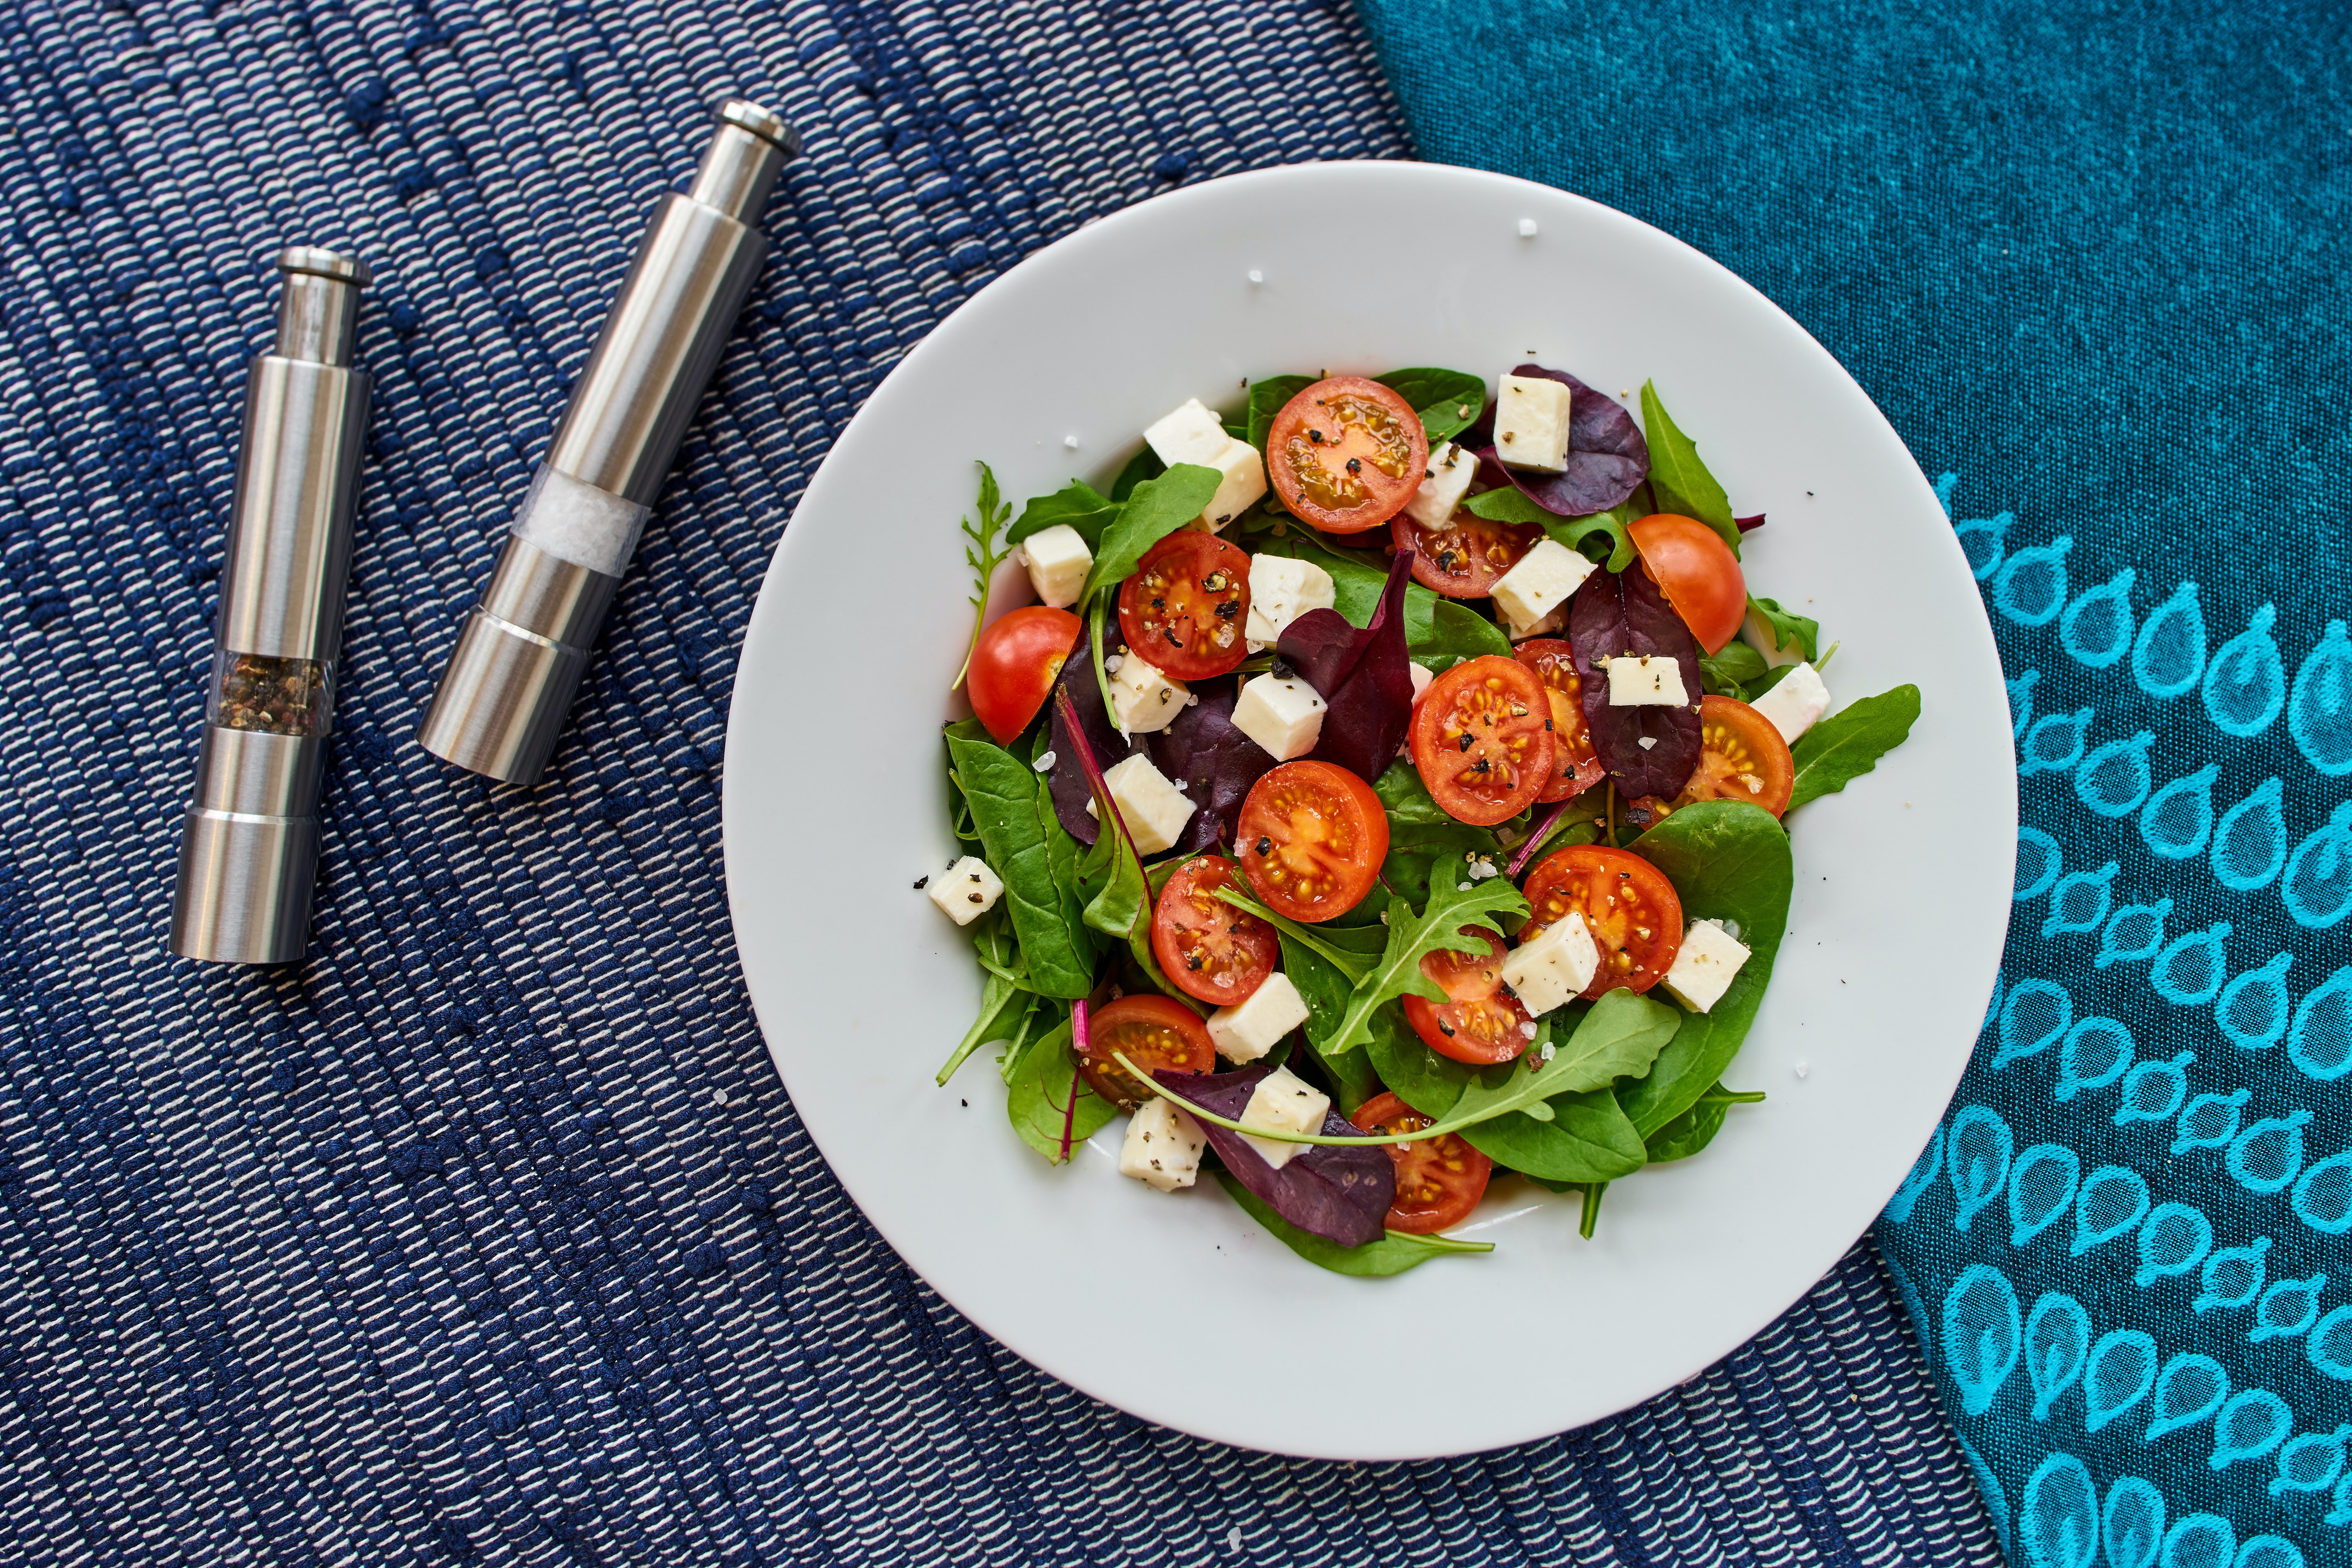 There is no better way than start your day with a tomato mozzarella salad!!